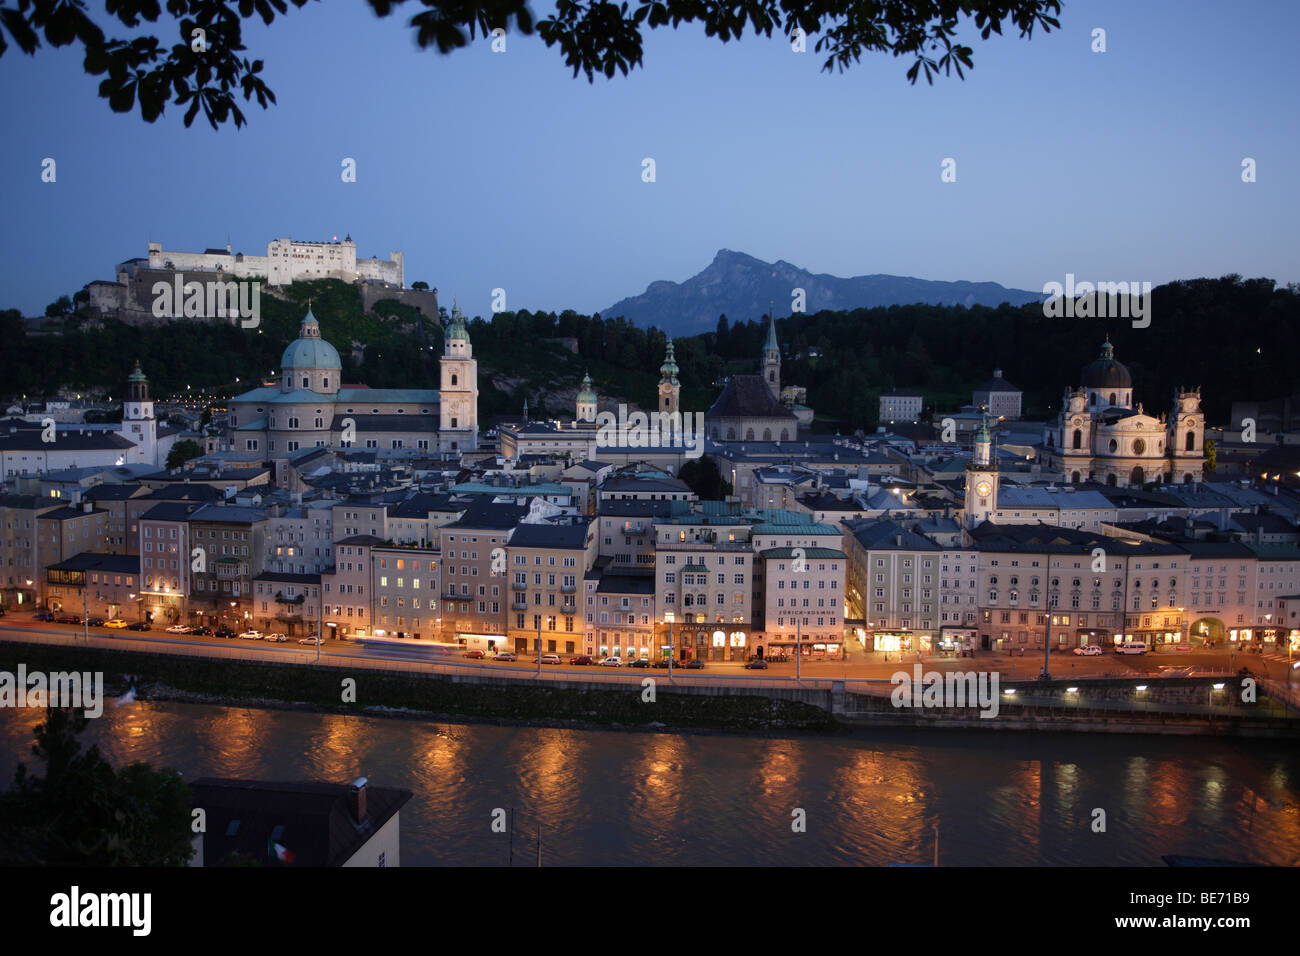 Austria, Salzburg, evening view of the Altstadt, old town, with river Salzach and Hohensalzburg Fortress Stock Photo